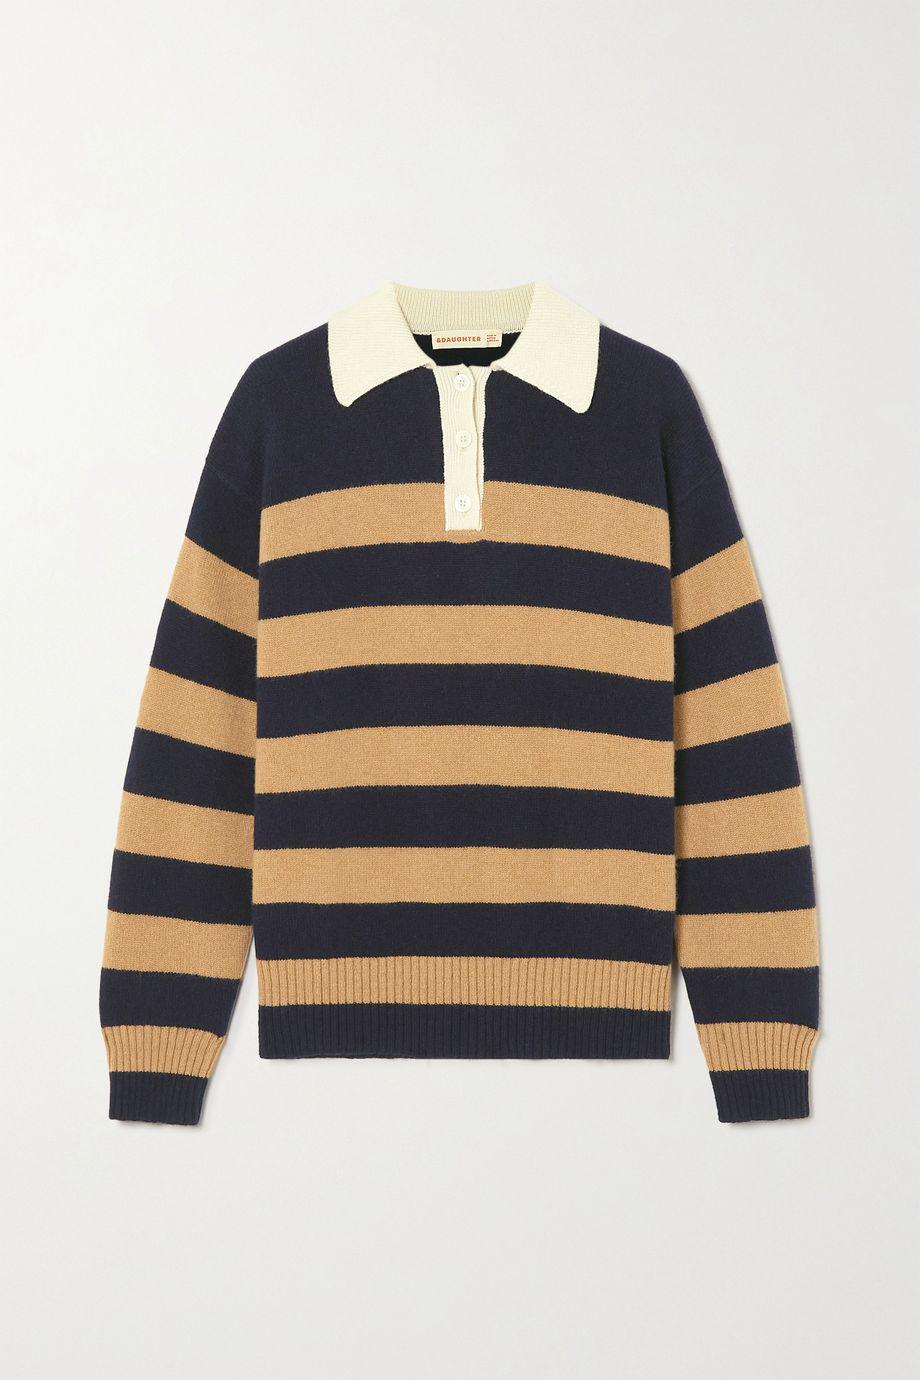 Edith striped wool sweater by &DAUGHTER